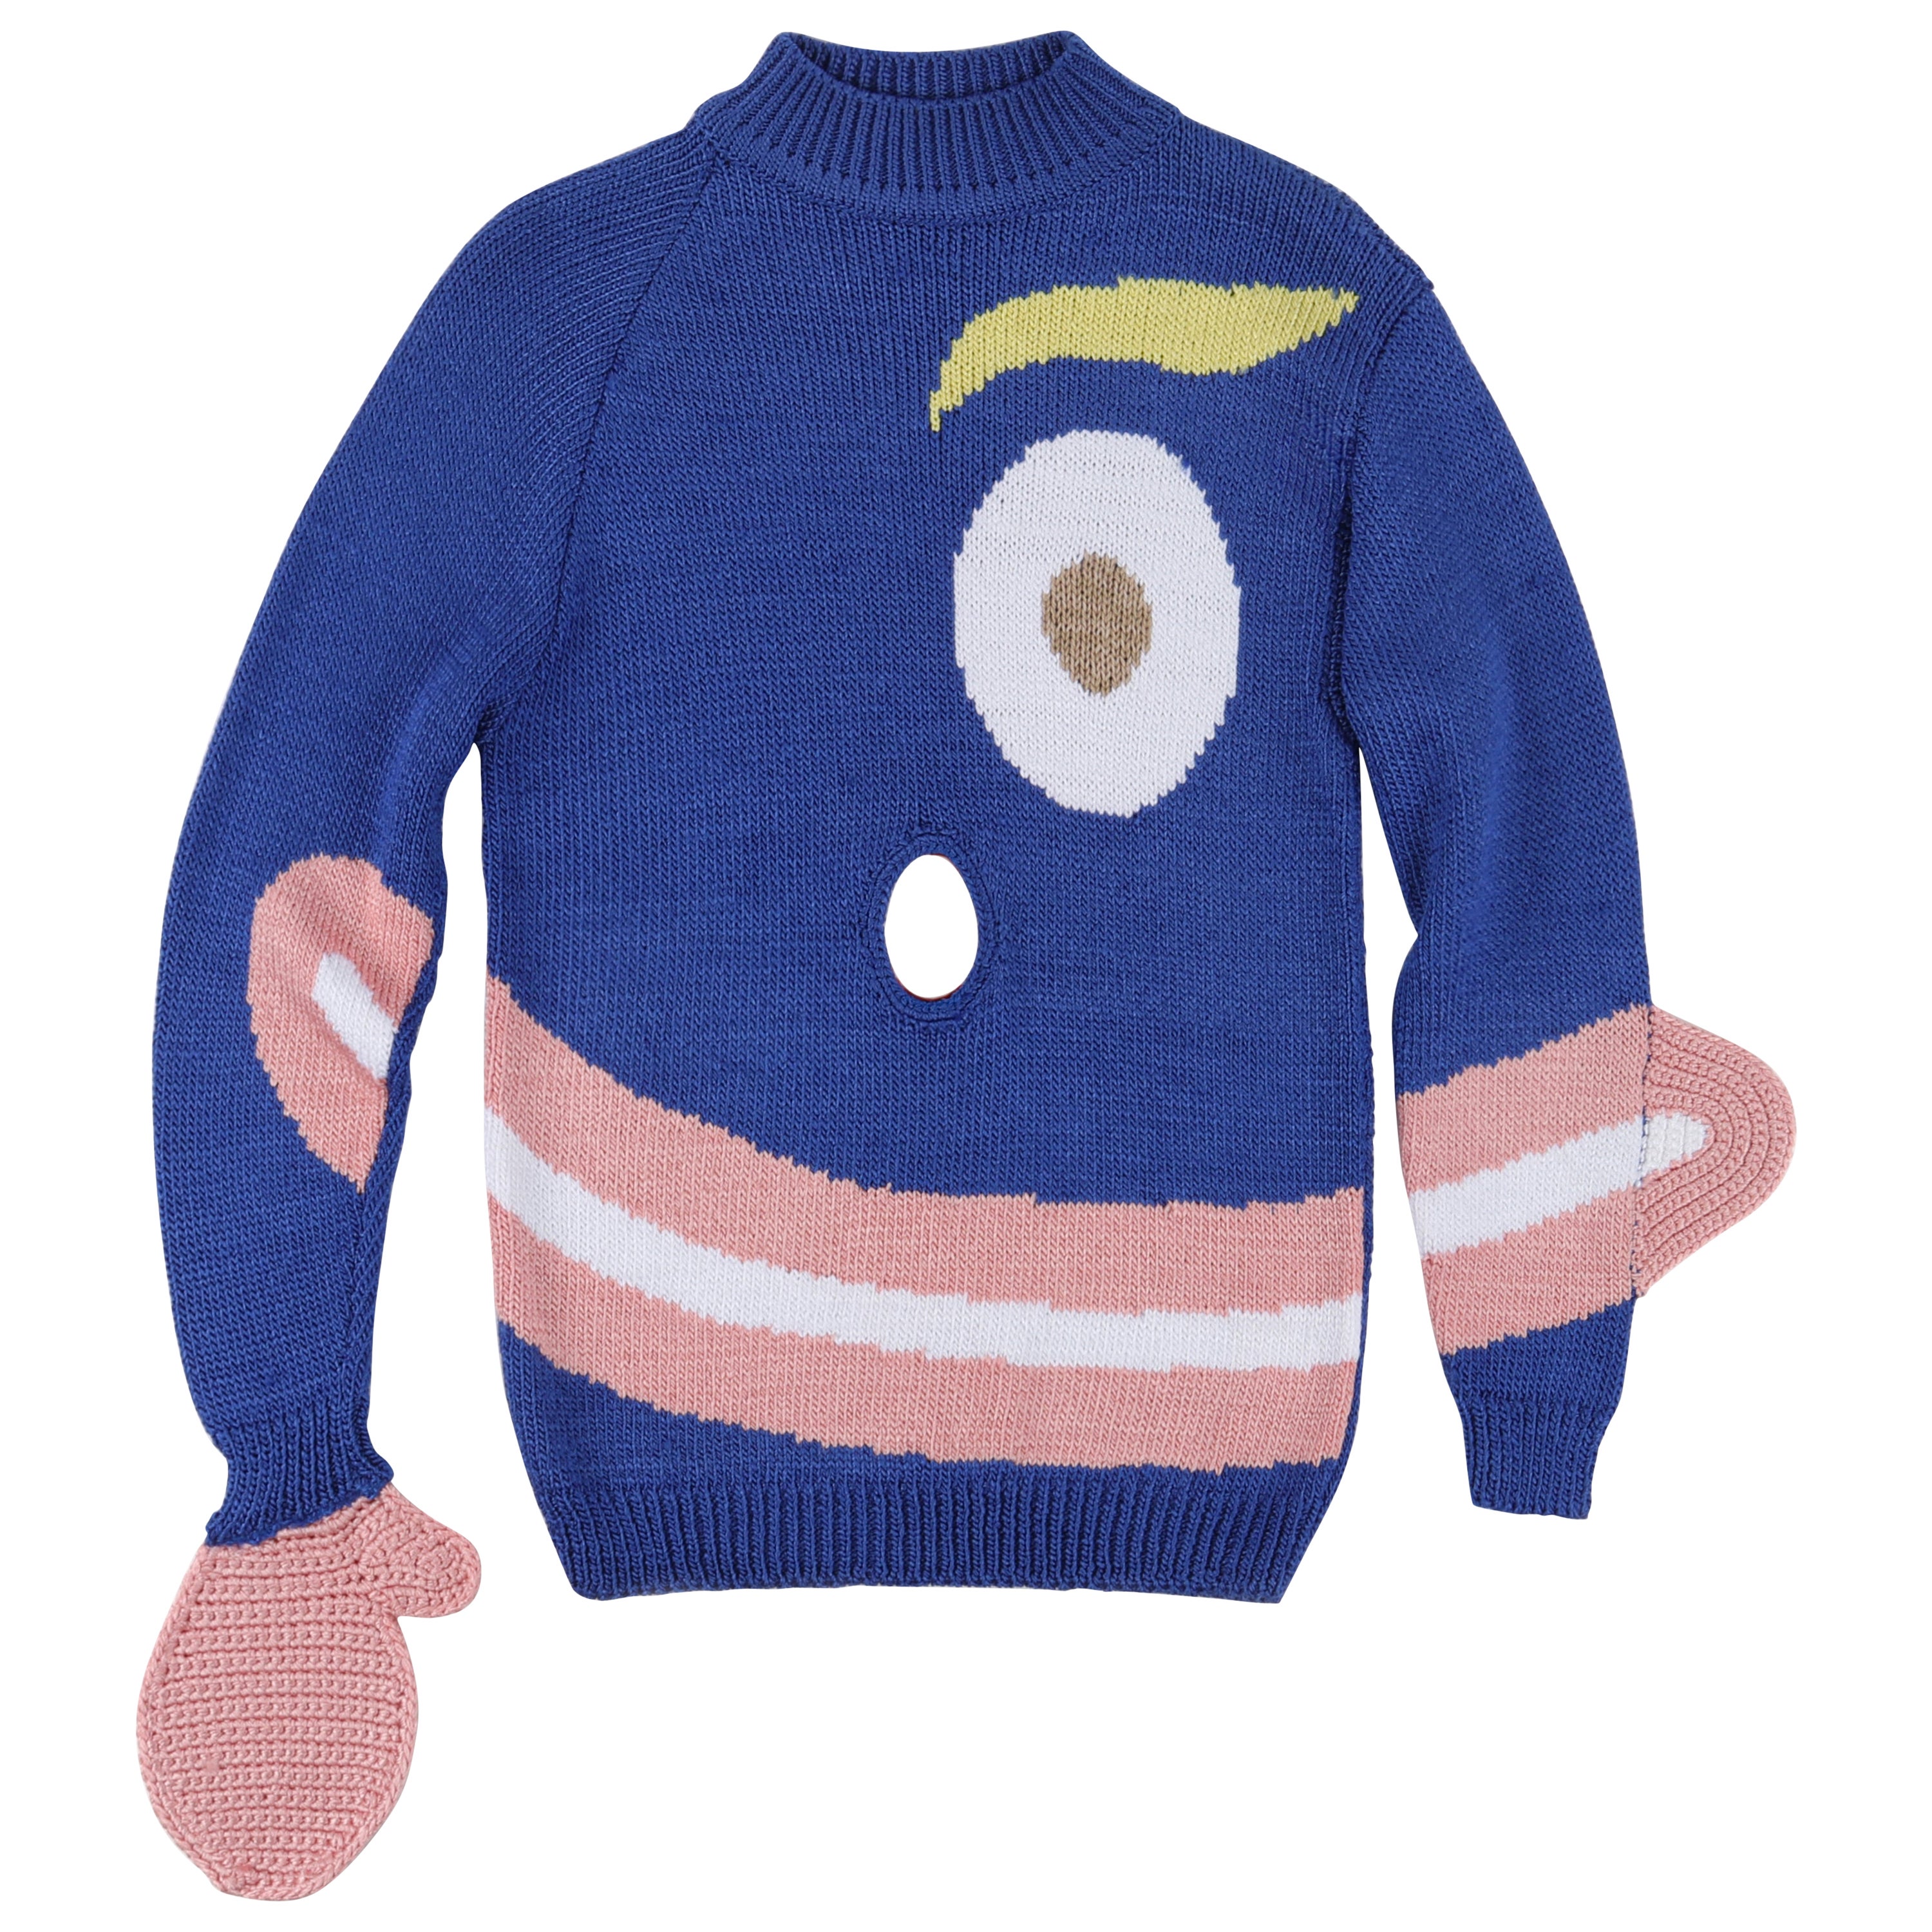 SURVIVAL OF THE FASHIONEST S/S 2020 Pull-over en tricot bleu Smiley Face Pull-over Top S en vente